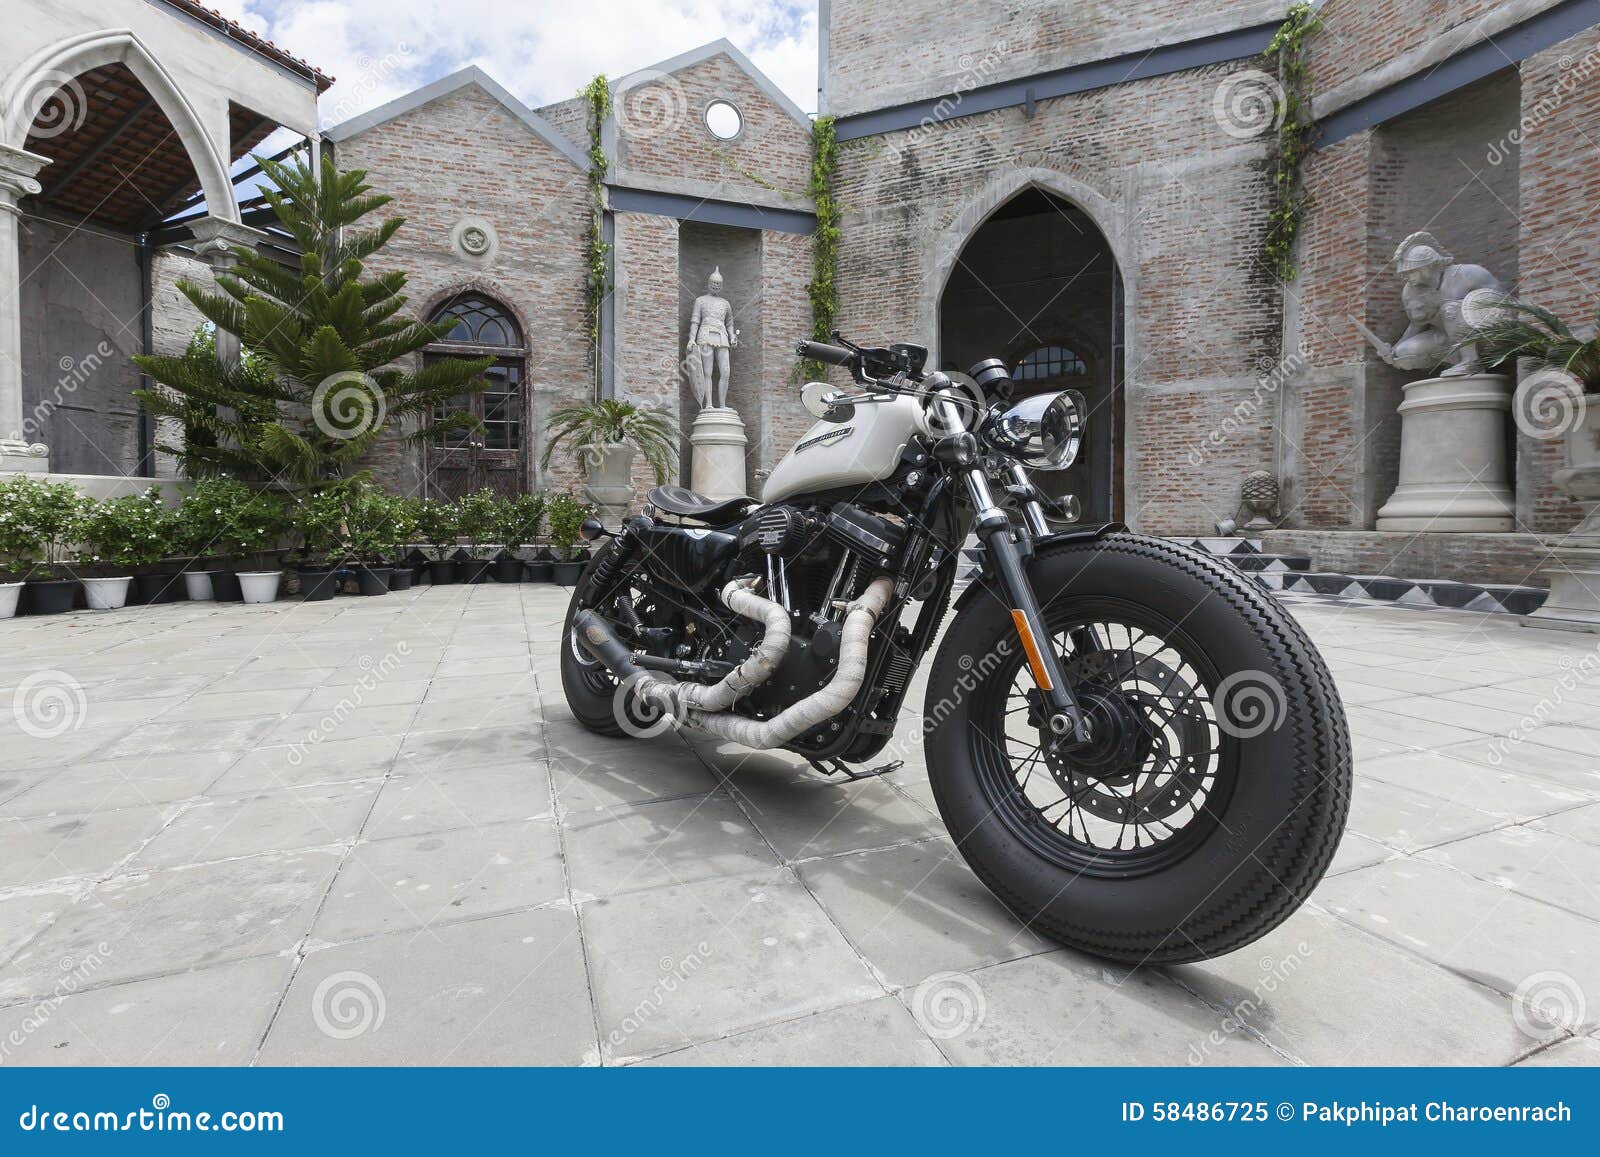 Harley Davidson Forty-Eight. Editorial Image - Image of style ...